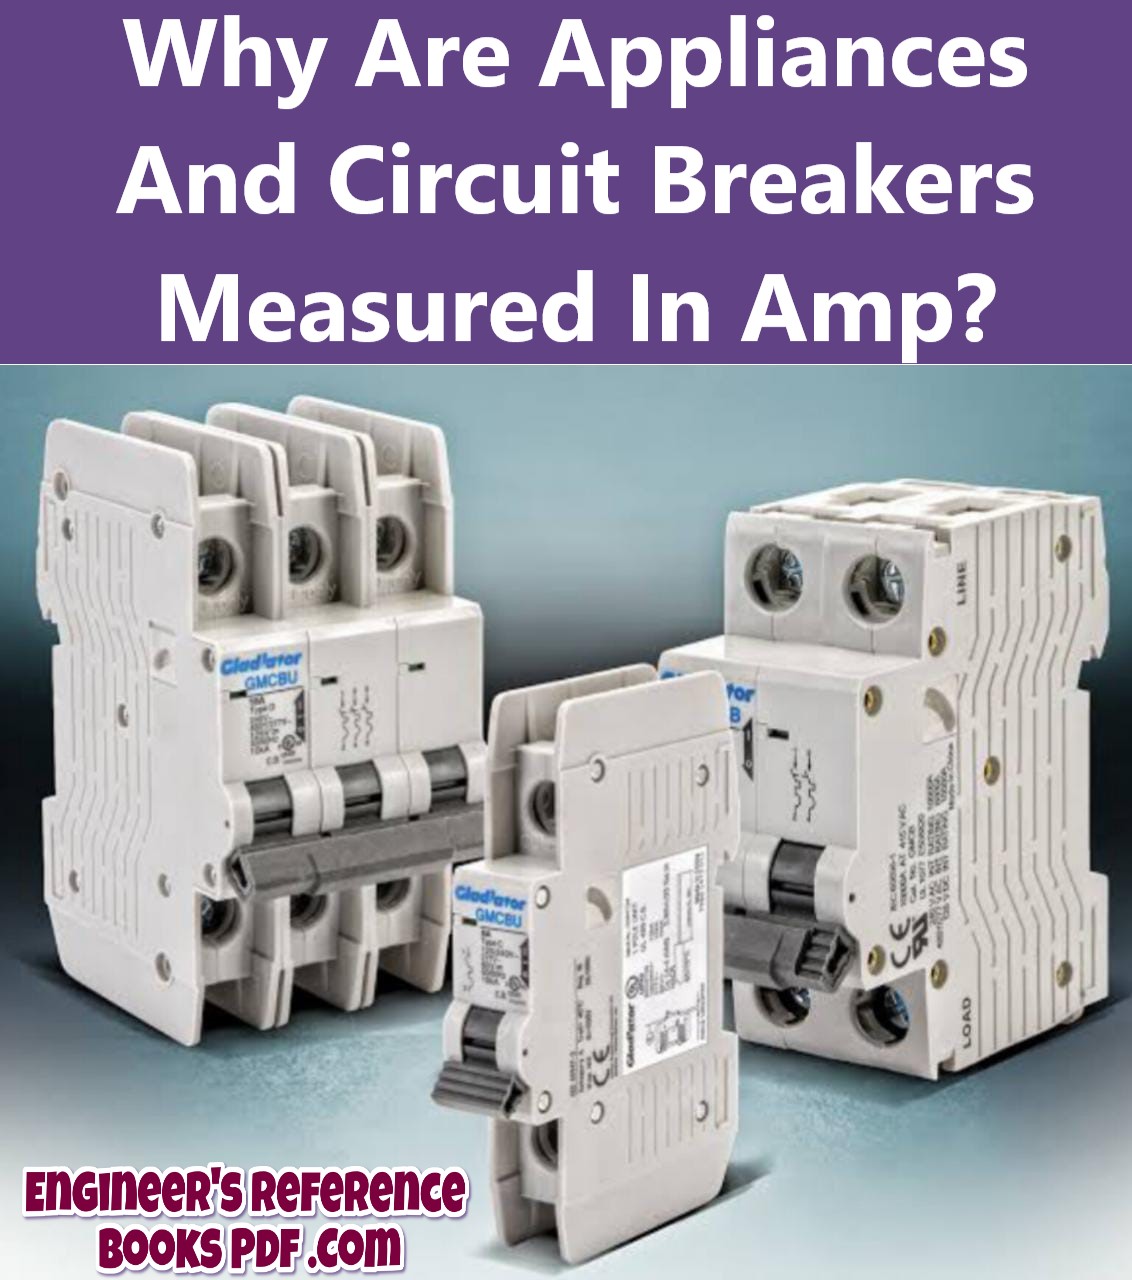 Why Are Appliances And Circuit Breakers Measured In Amp?
